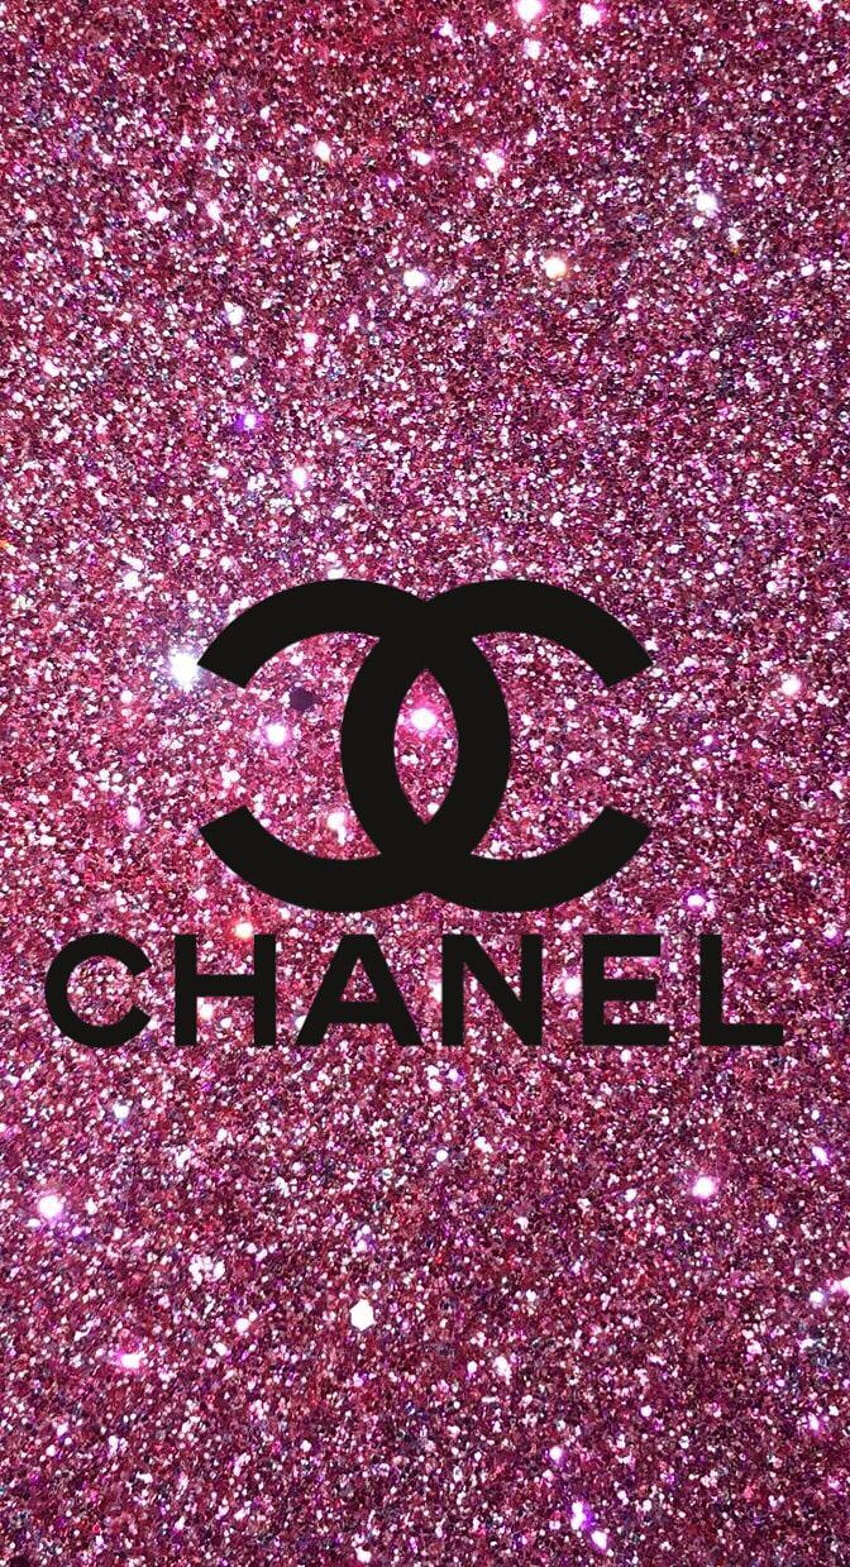 Free download Pink Chanel Wallpaper Pink and silver hello kitty [480x800]  for your Desktop, Mobile & Tablet, Explore 47+ Pink Chanel Wallpaper